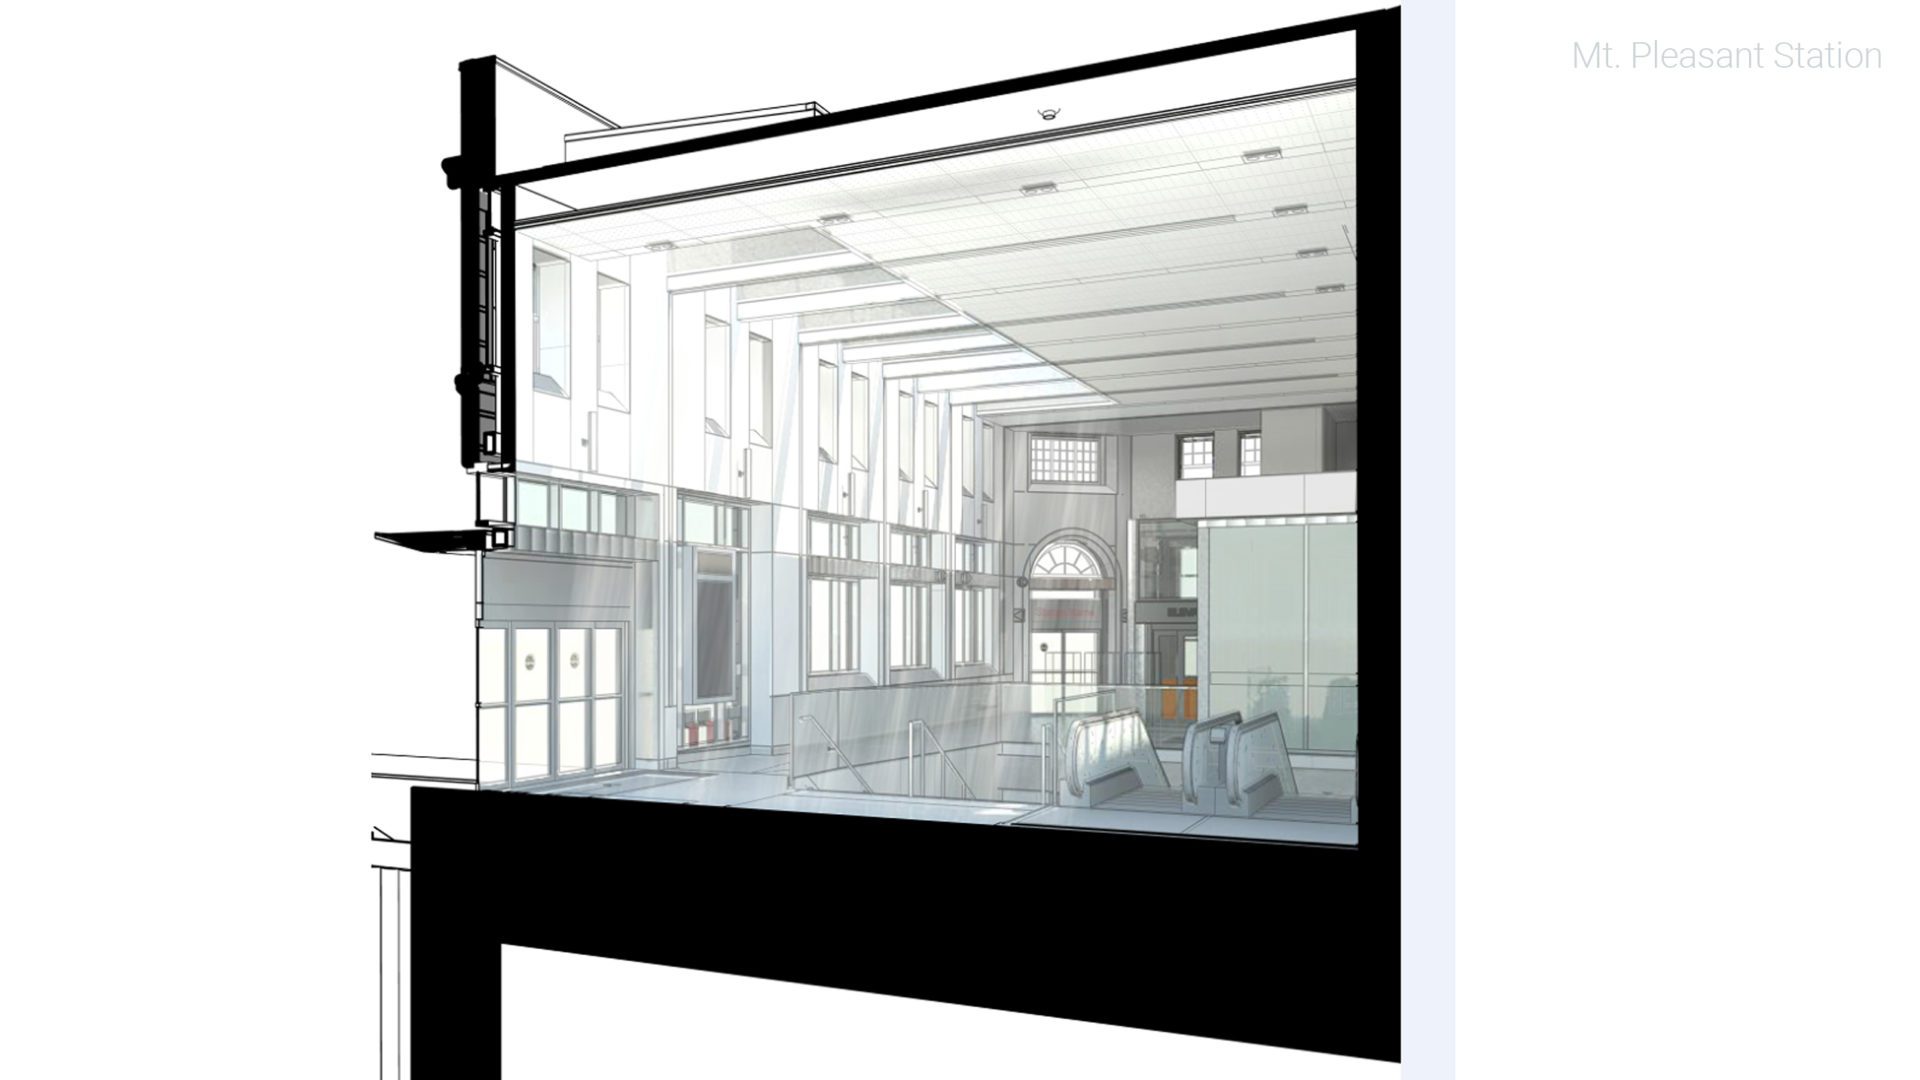 rendering of mt pleasant subway station entrance. image of doors with nearby stairs and escalators.